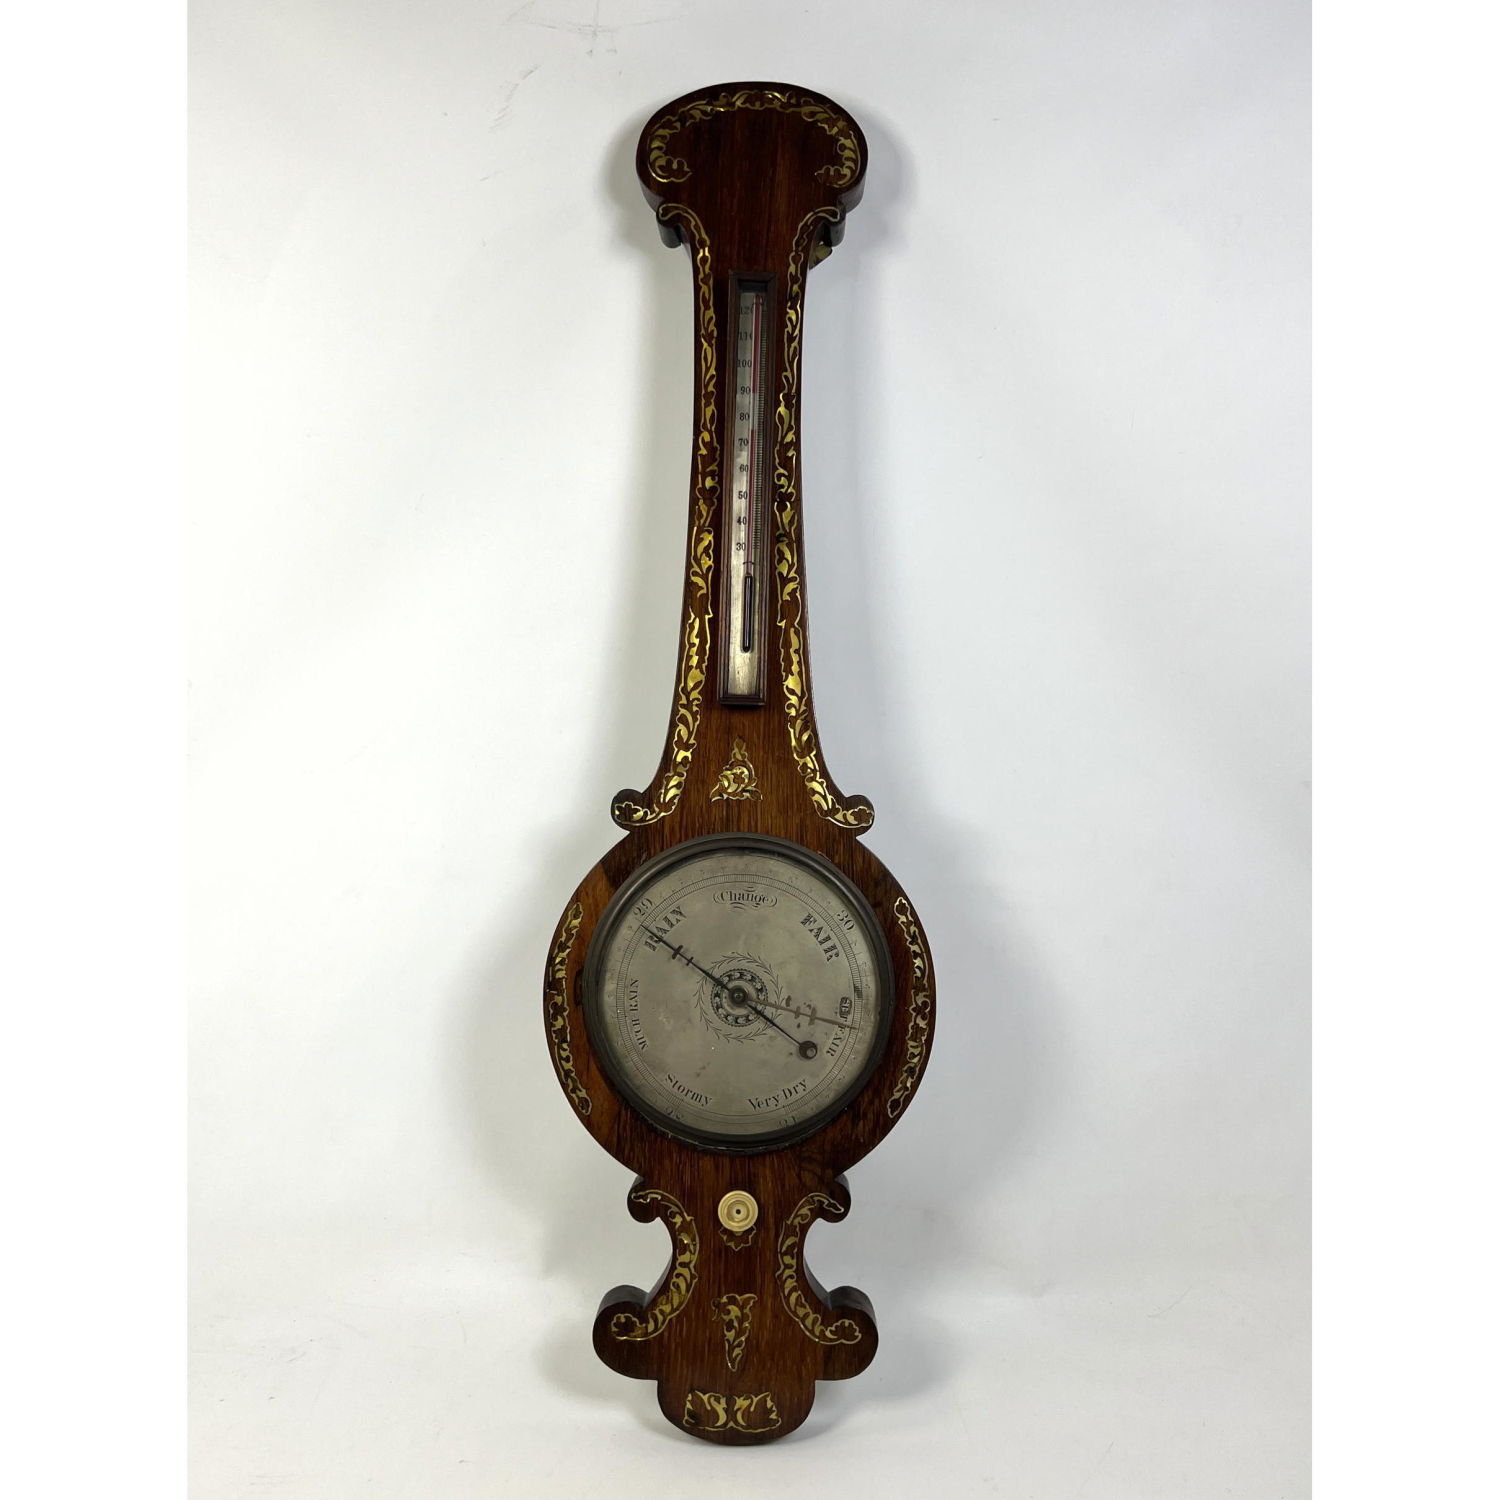 Antique Barometer Thermometer 

Dimensions: